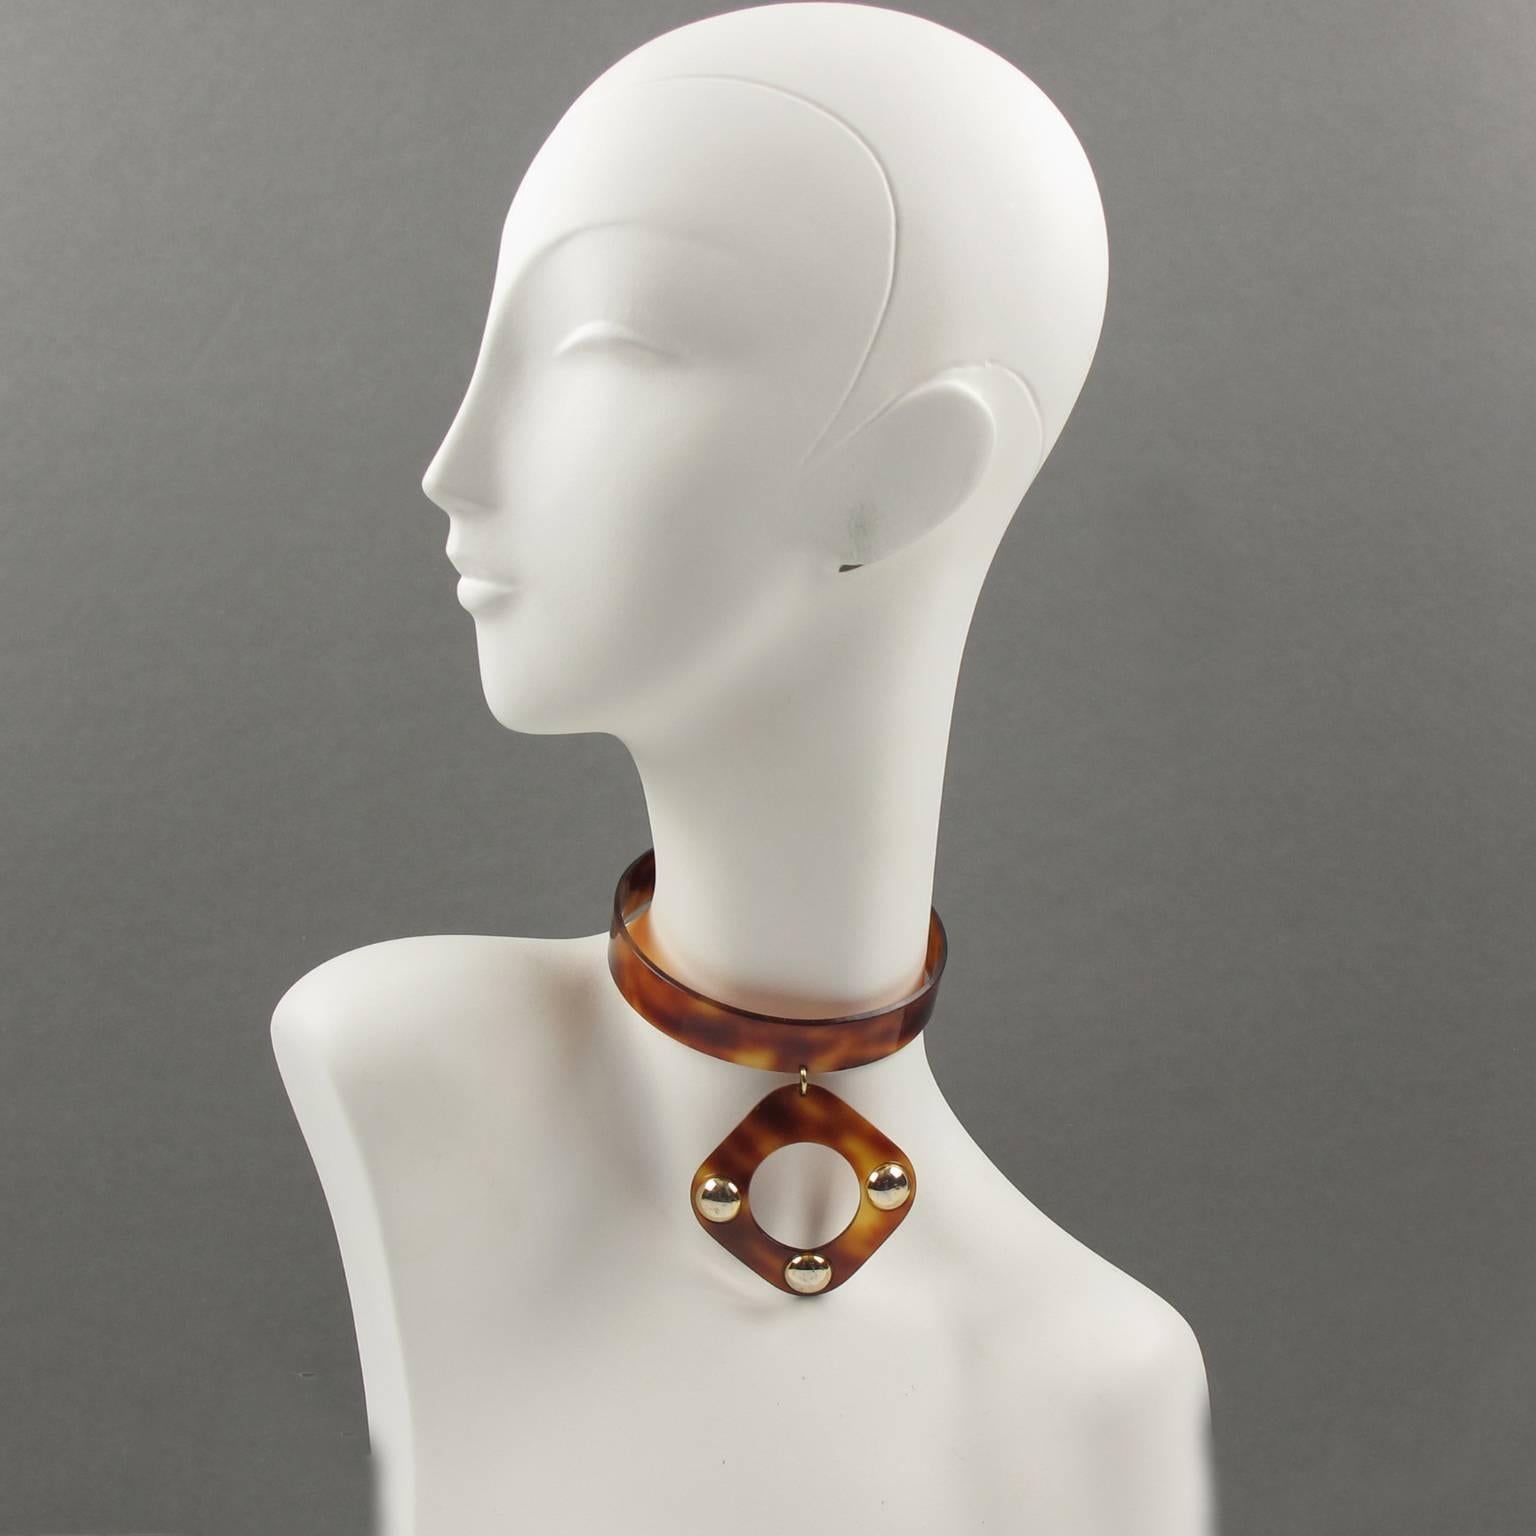 Rare 1970s Space Age celluloid dog collar necklace in the style of Courreges creations. Around the neck modernist rigid band with geometric dangling charm pendant in transparent tortoiseshell color, ornate with gilded metal studs. No marking.